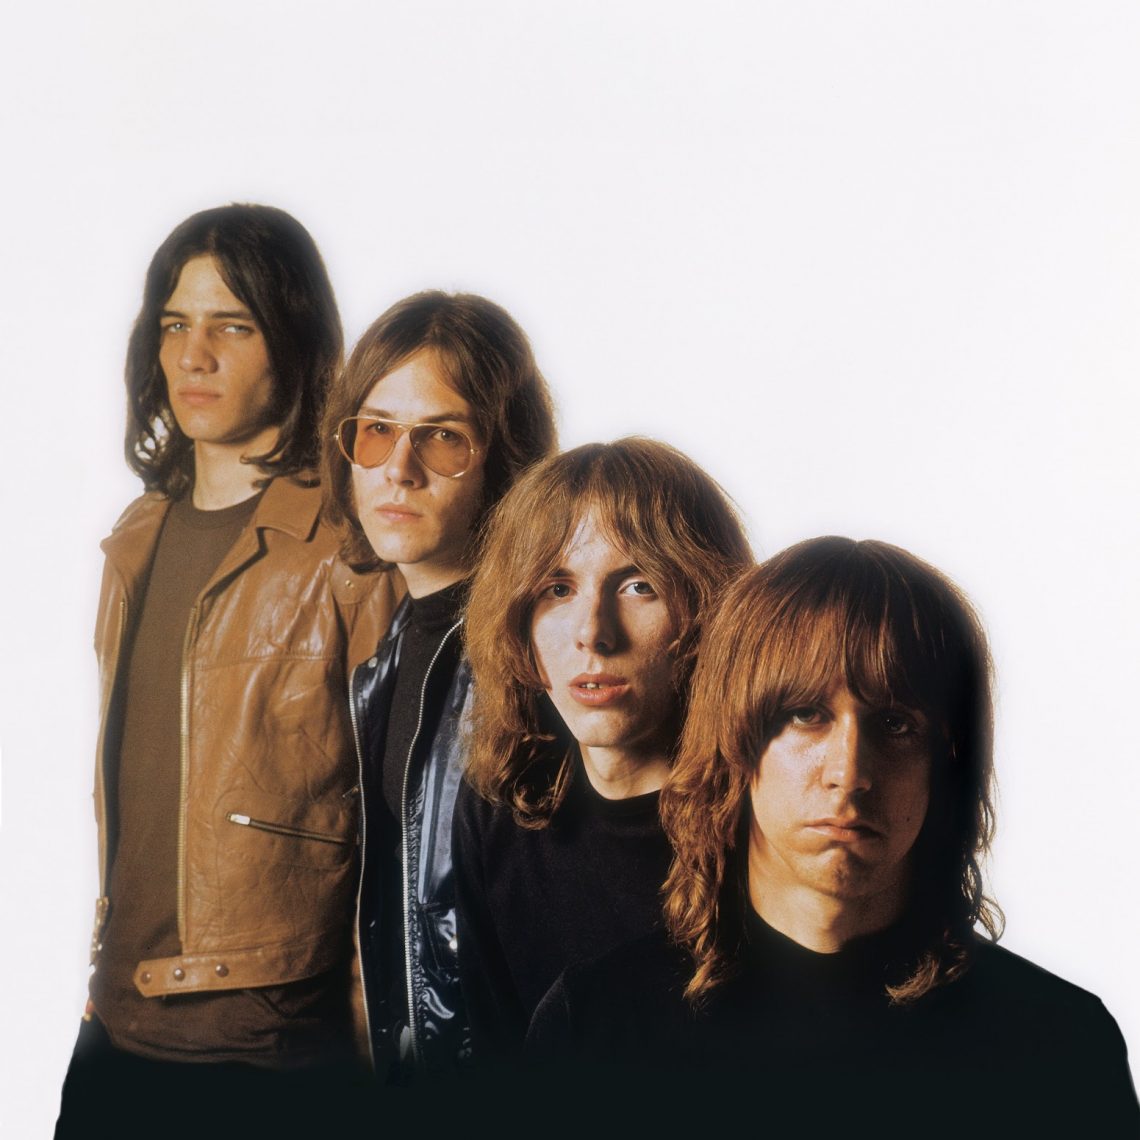 THE STOOGES  50th ANNIVERSARY SUPER DELUXE EDITION  AVAILABLE NOW